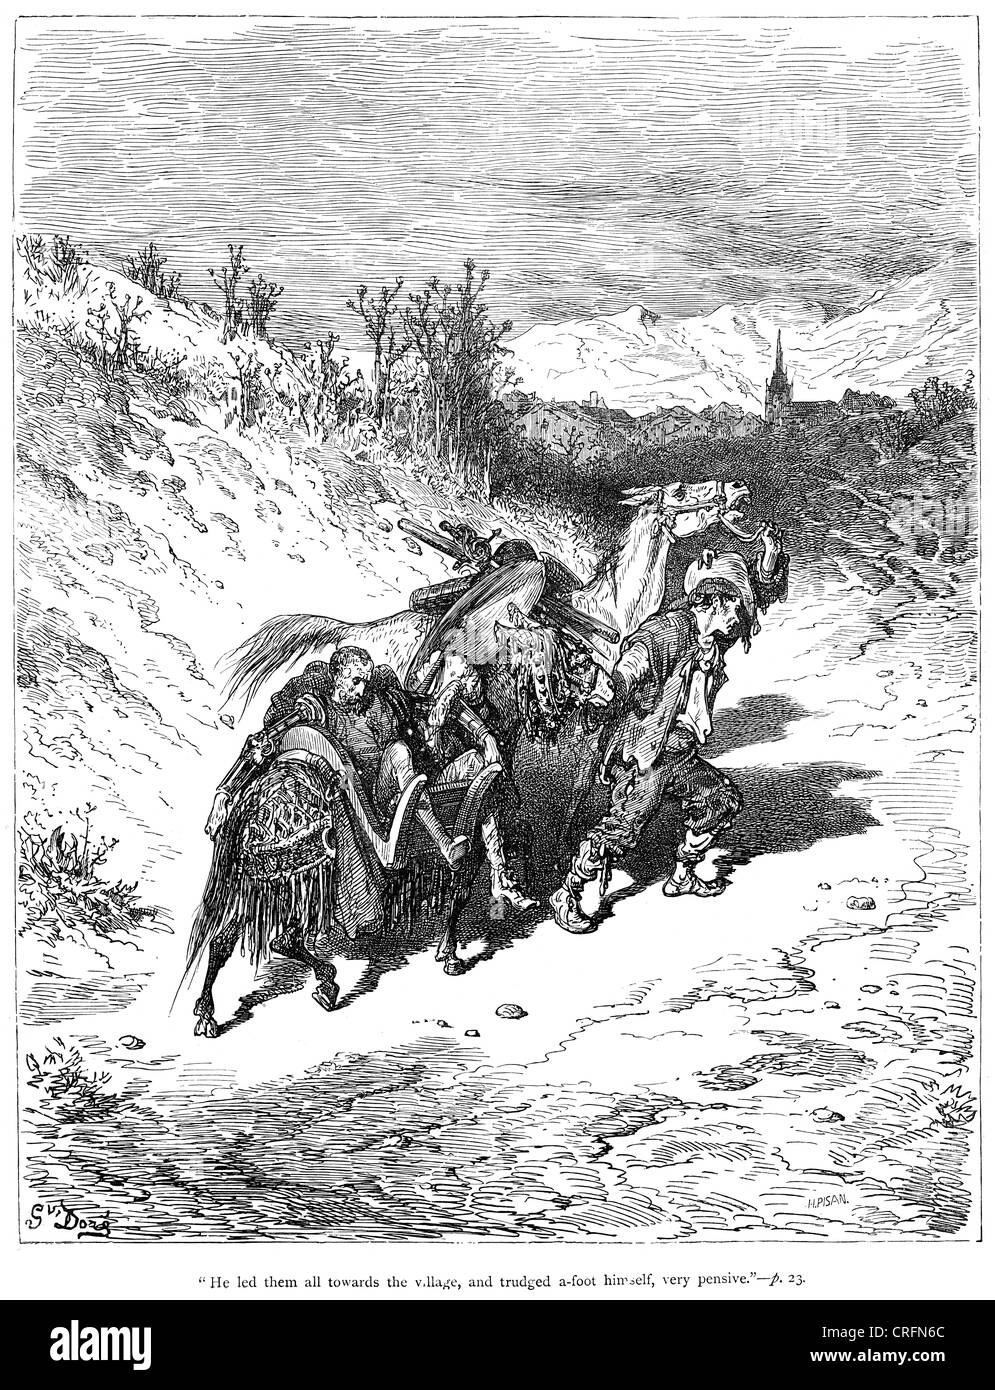 Don Quixote and Sancho Panza, he led them all towards the village ...